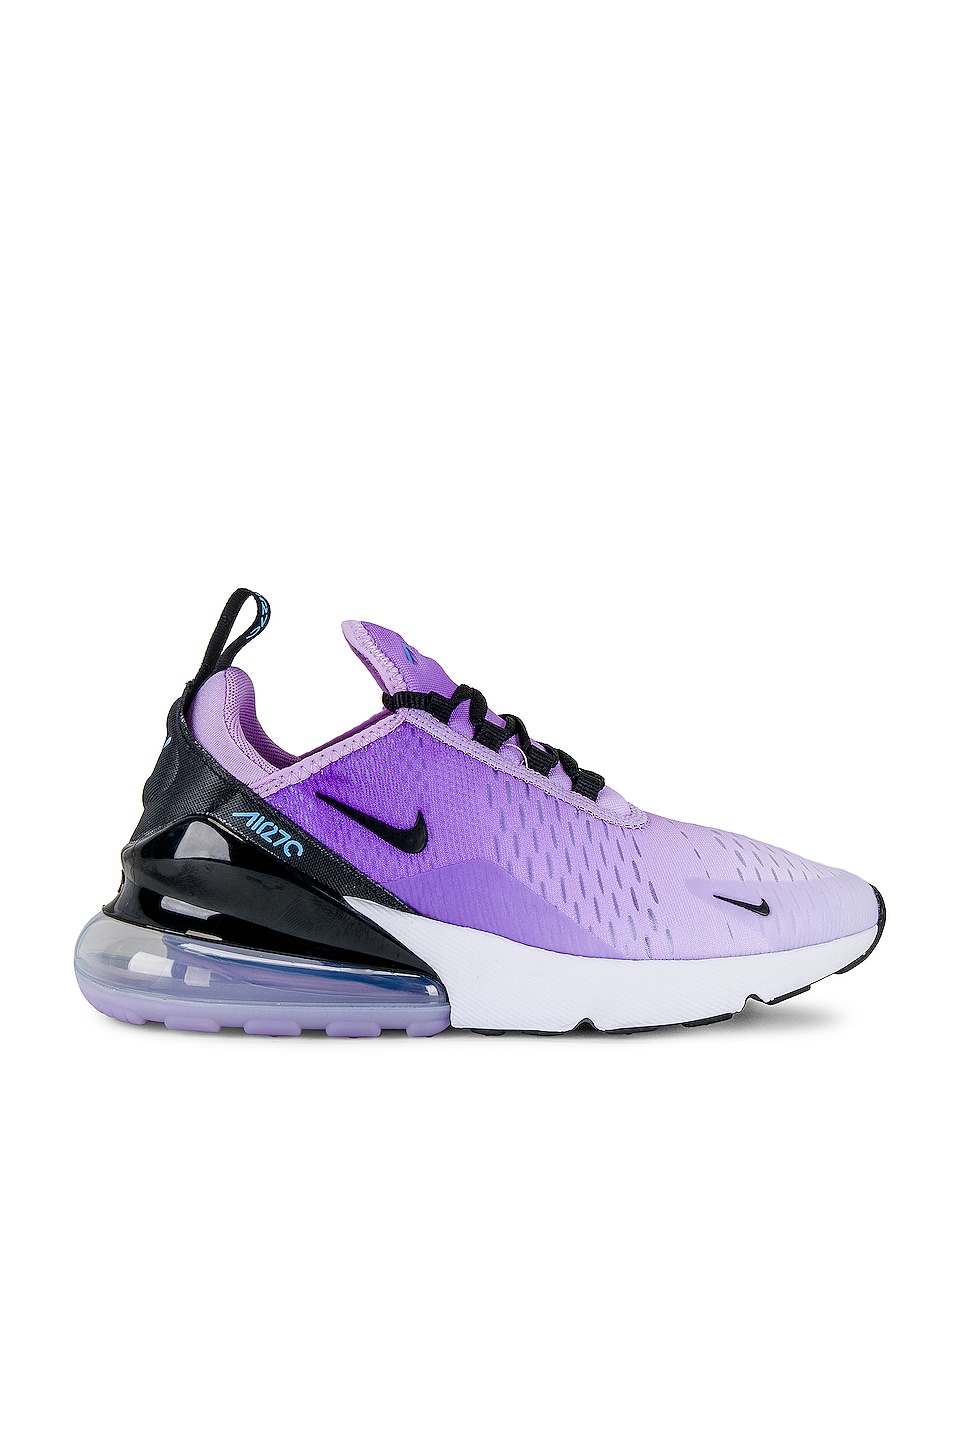 Image 1 of Air Max 270 Sneaker in Lilac, Black, University Blue, & Barely Grape